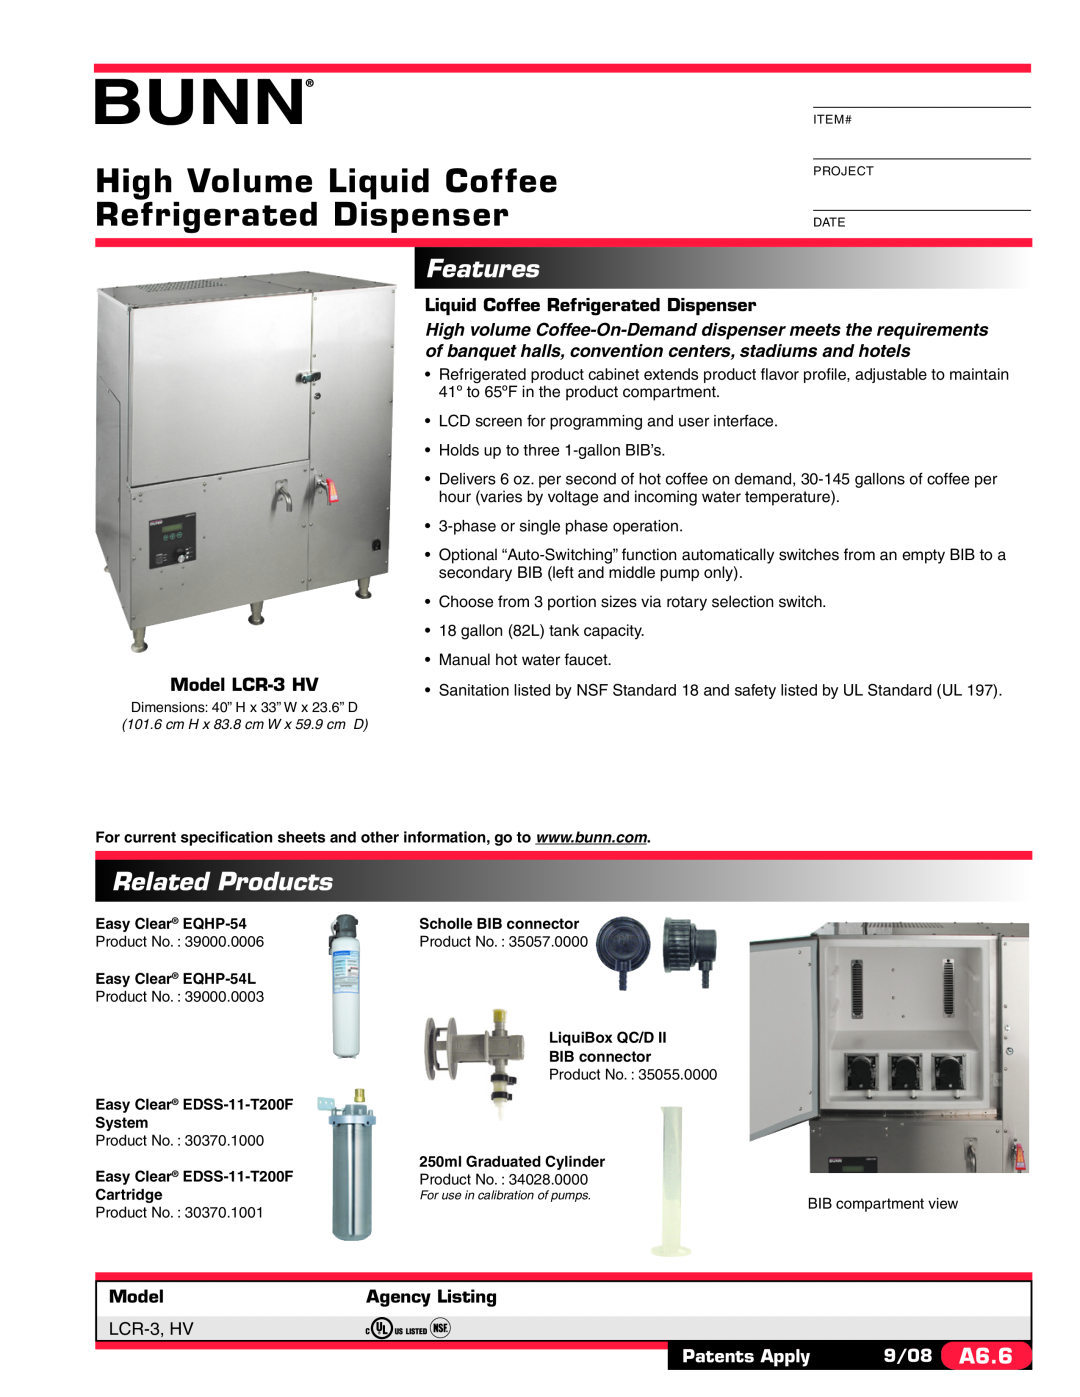 Bunn LCR-3 HV specifications High Volume Liquid Coffee Refrigerated Dispenser, Features, Related Products, Model LCR-3HV 